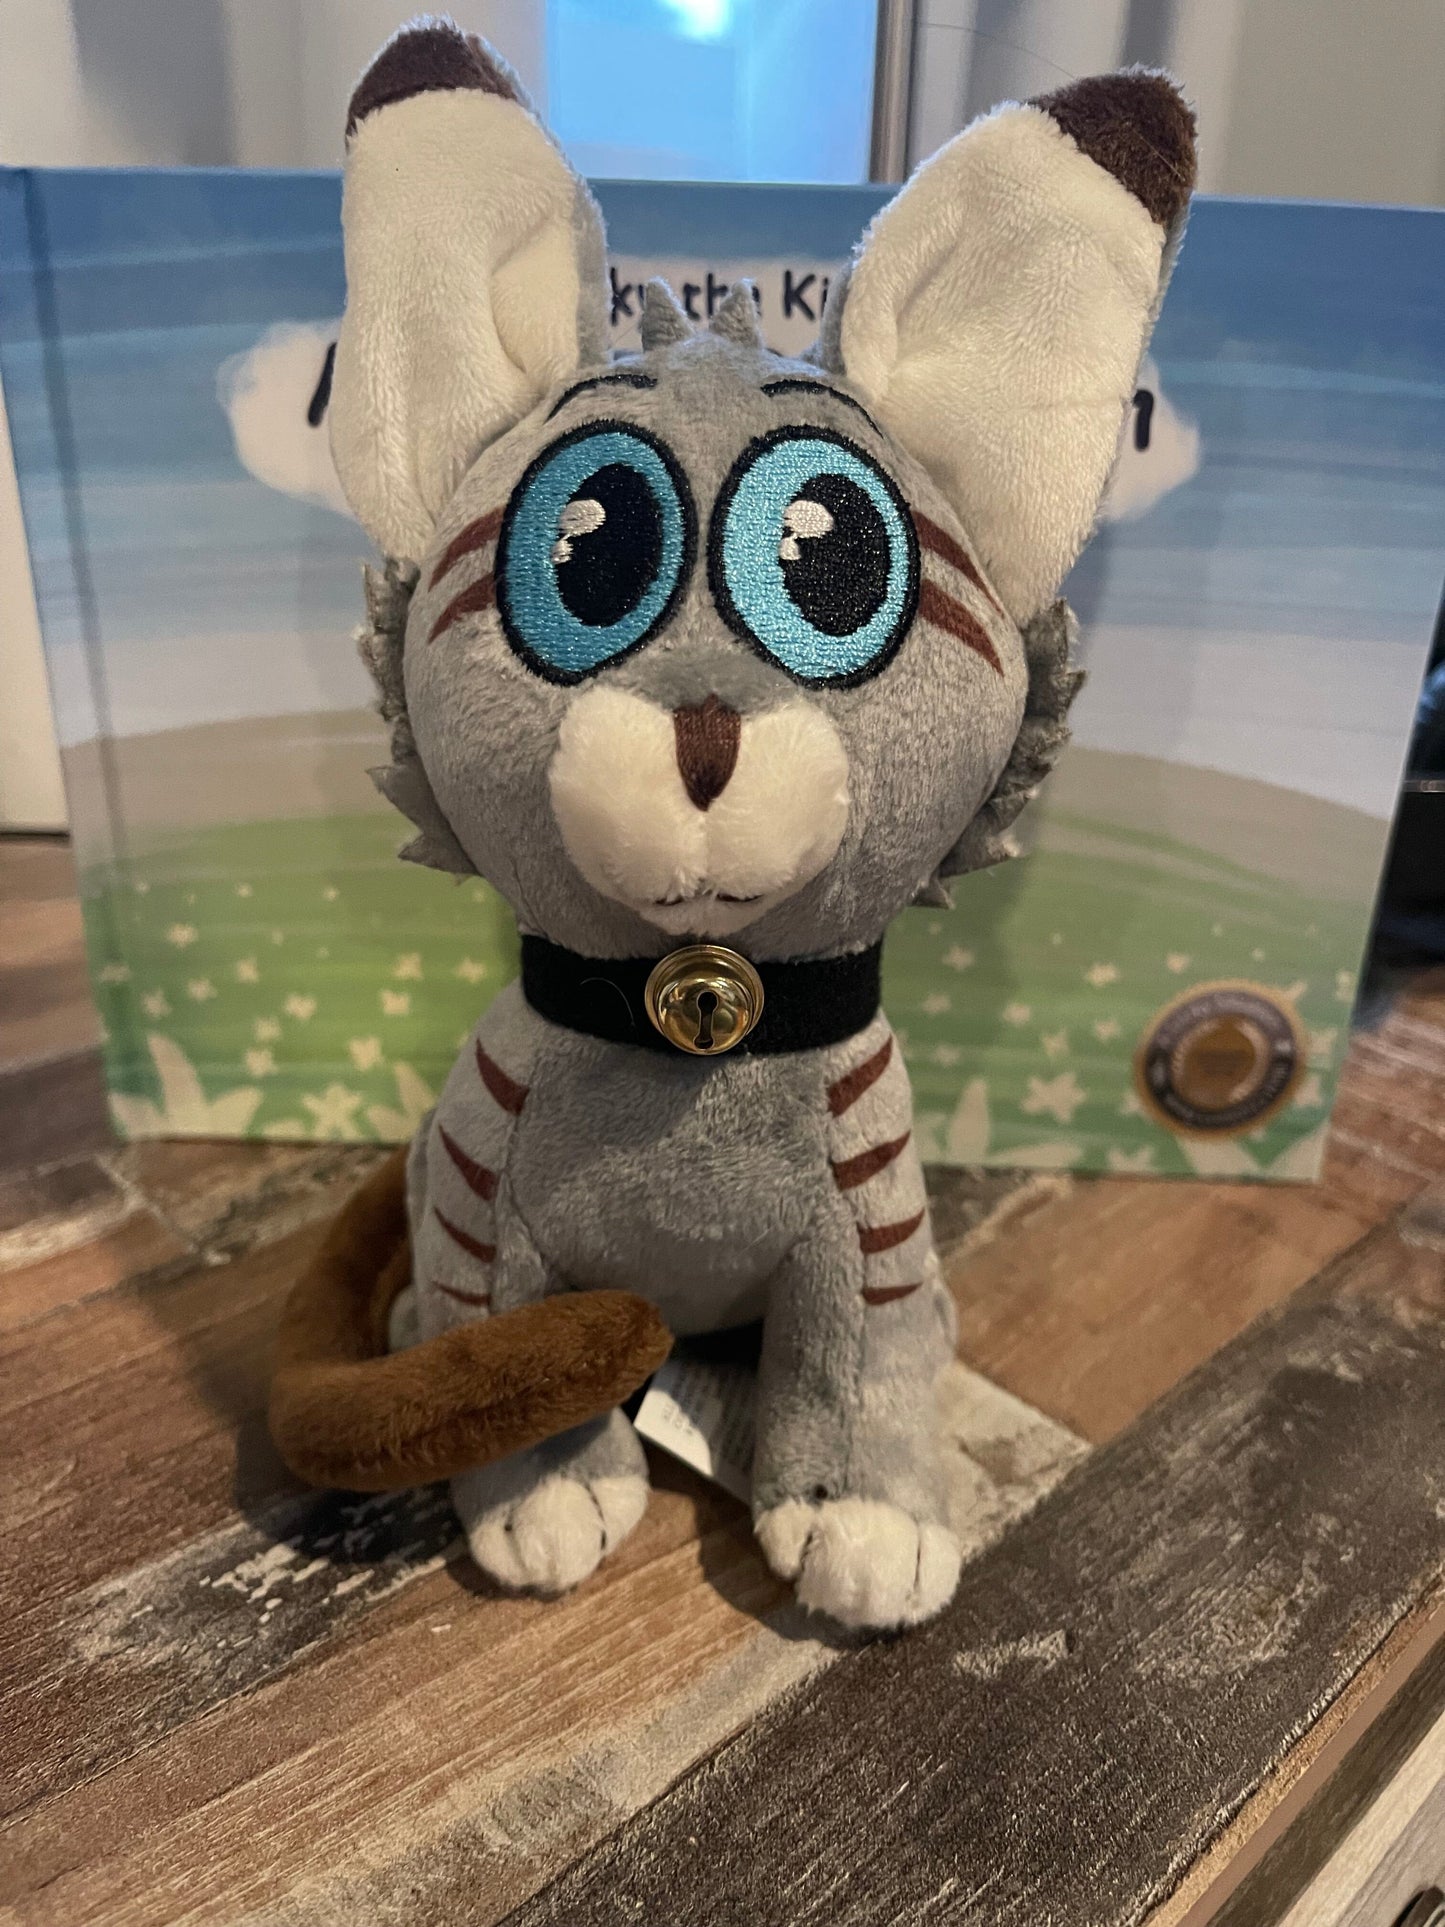 Sticky the Kitty, Stuffie! Modeled after the Sticky from the Award winning kids books, the Sticky Stuffie has made his way from the Pyramids of Egypt to the top of Alaska and all the way down to Australia! Where will YOUR Sticky go?